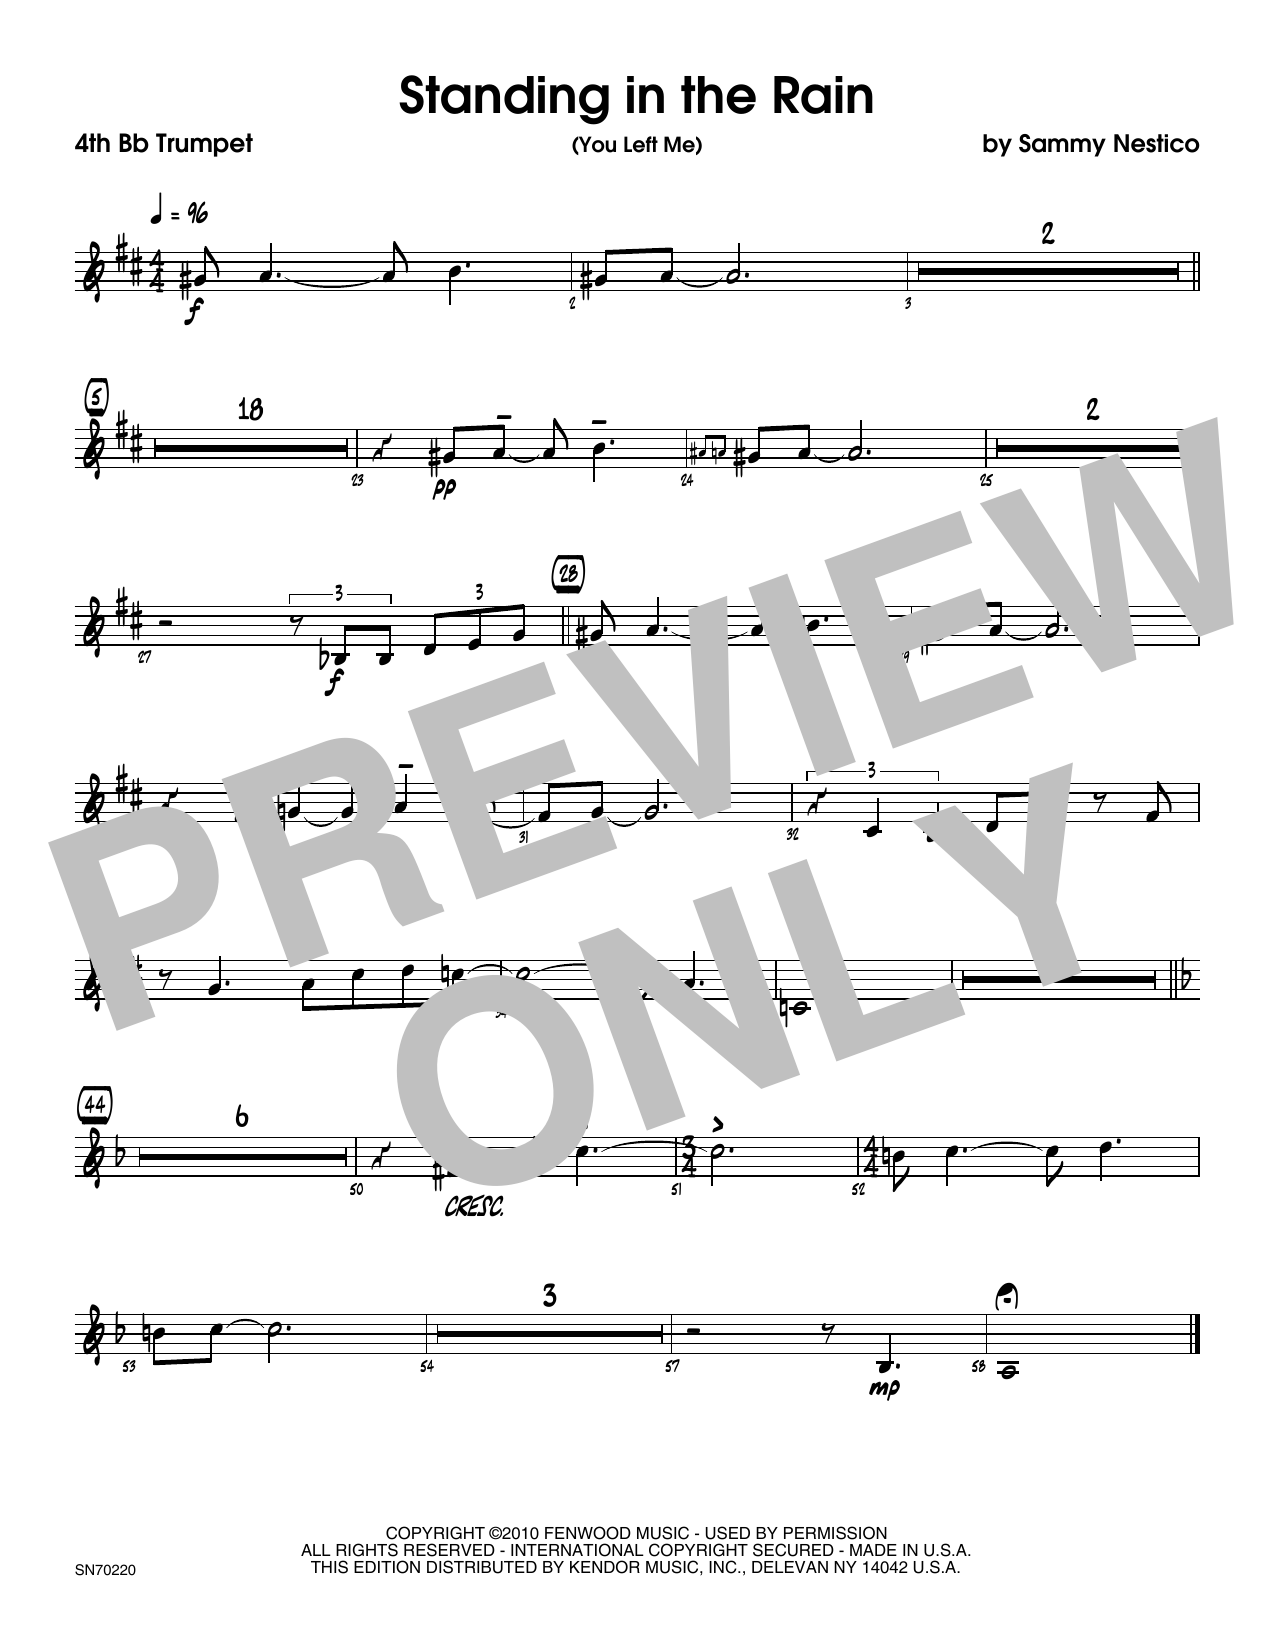 Download Sammy Nestico Standing In The Rain (You Left Me) - 4t Sheet Music